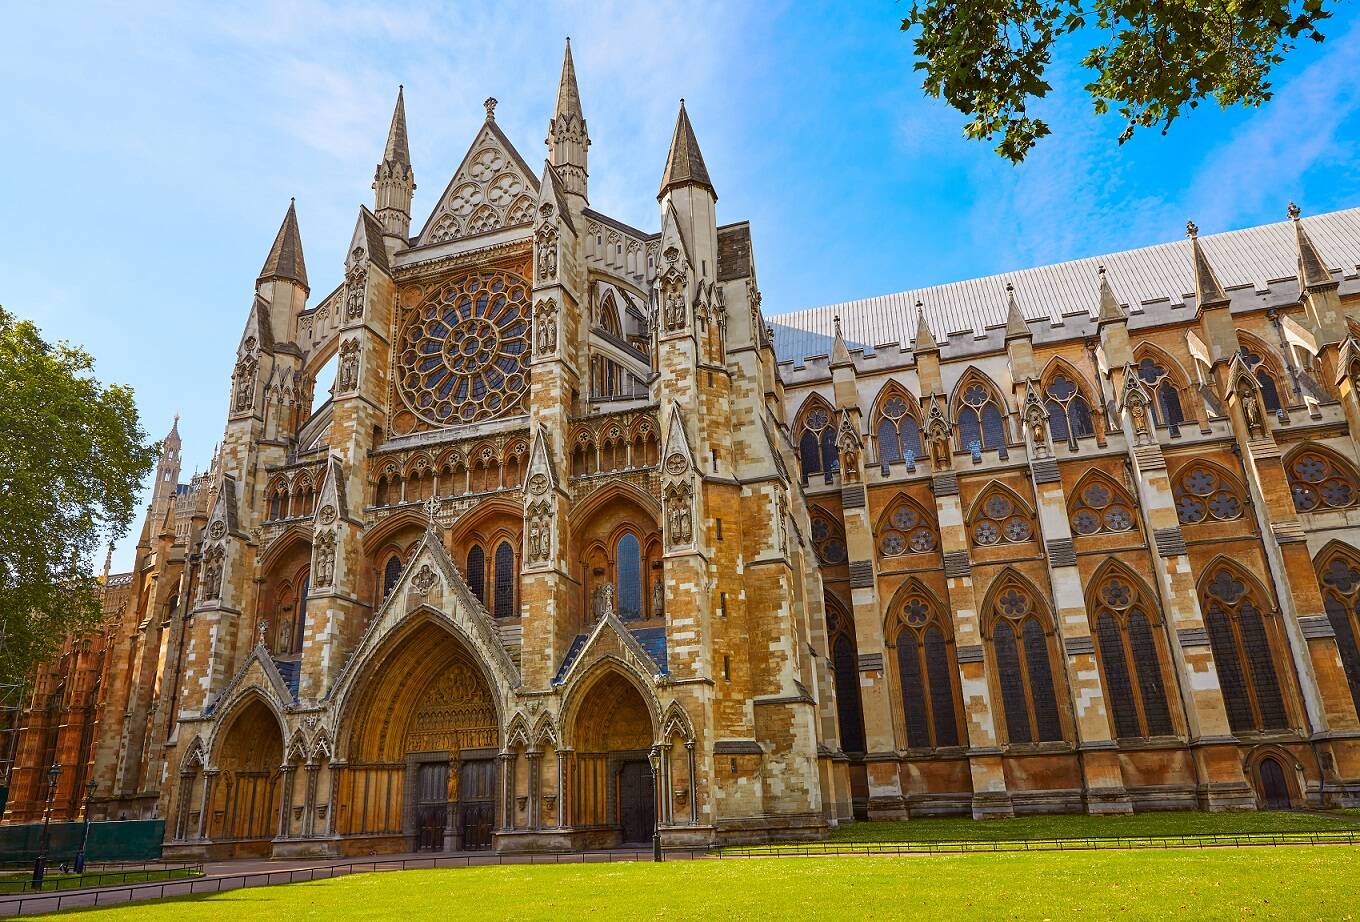 Who is buried at Westminster Abbey